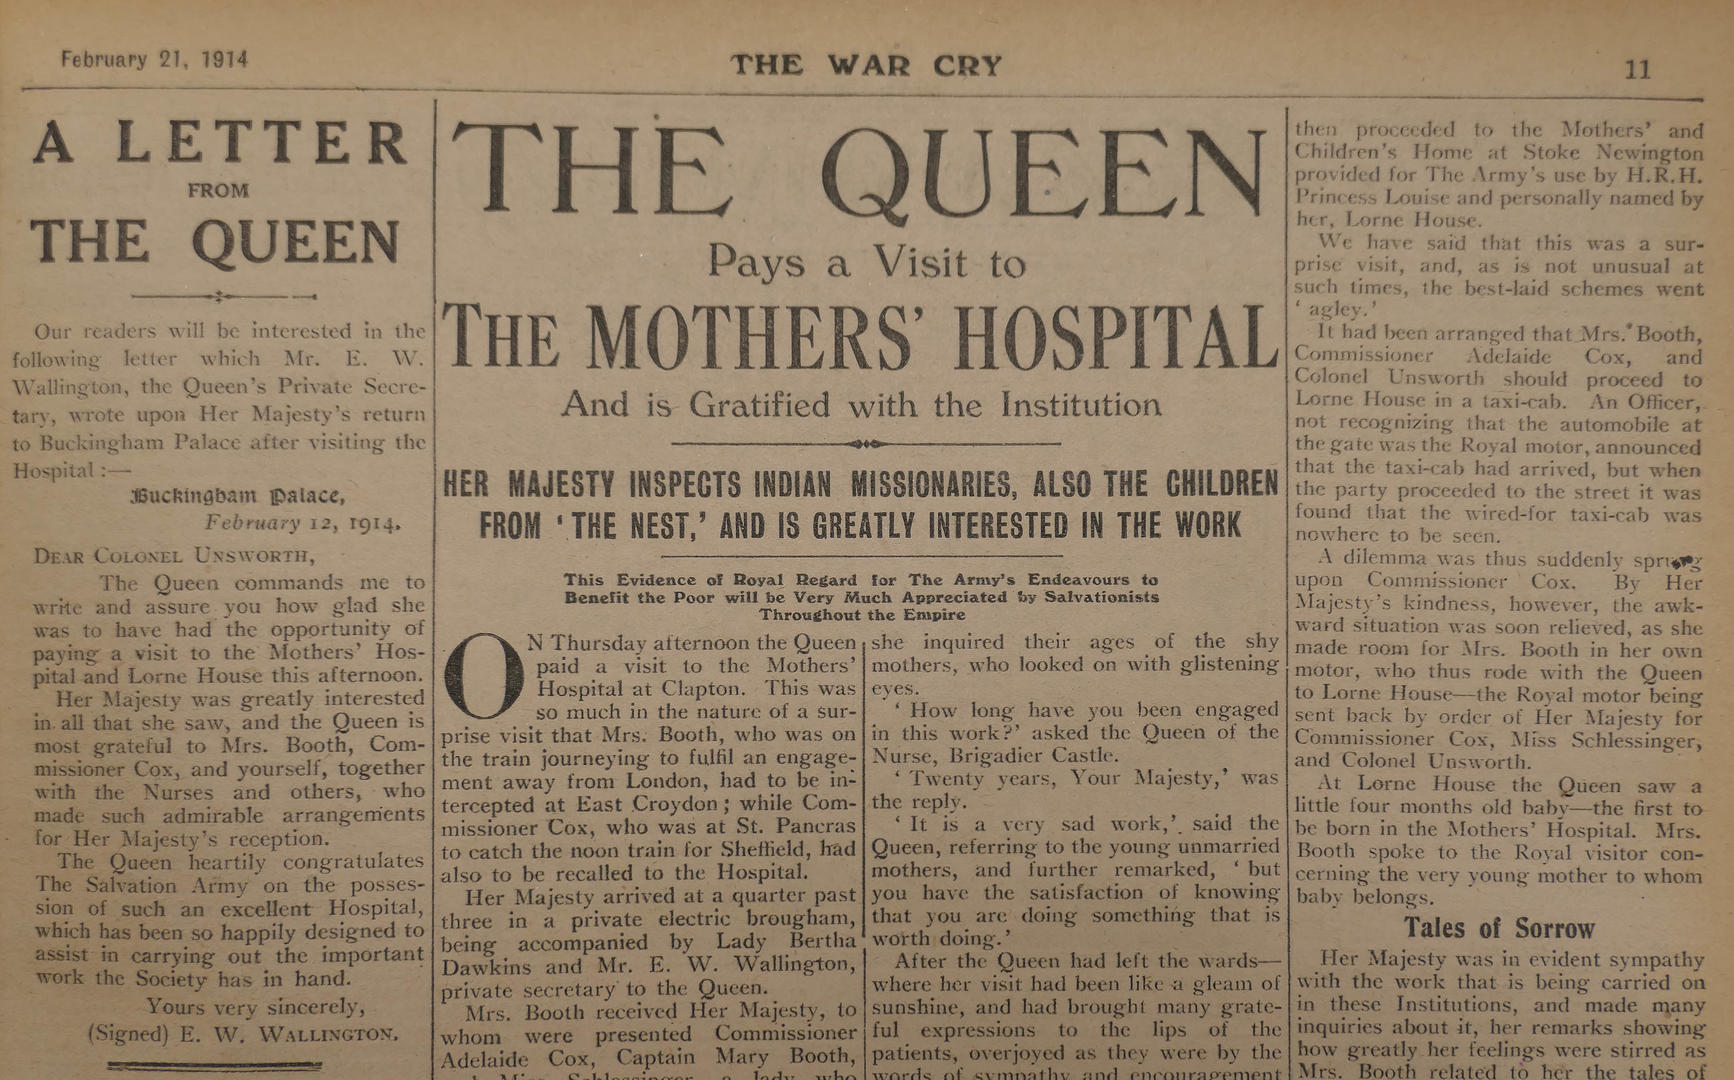 Articles about Queen Mary visiting The Mothers' Hospital